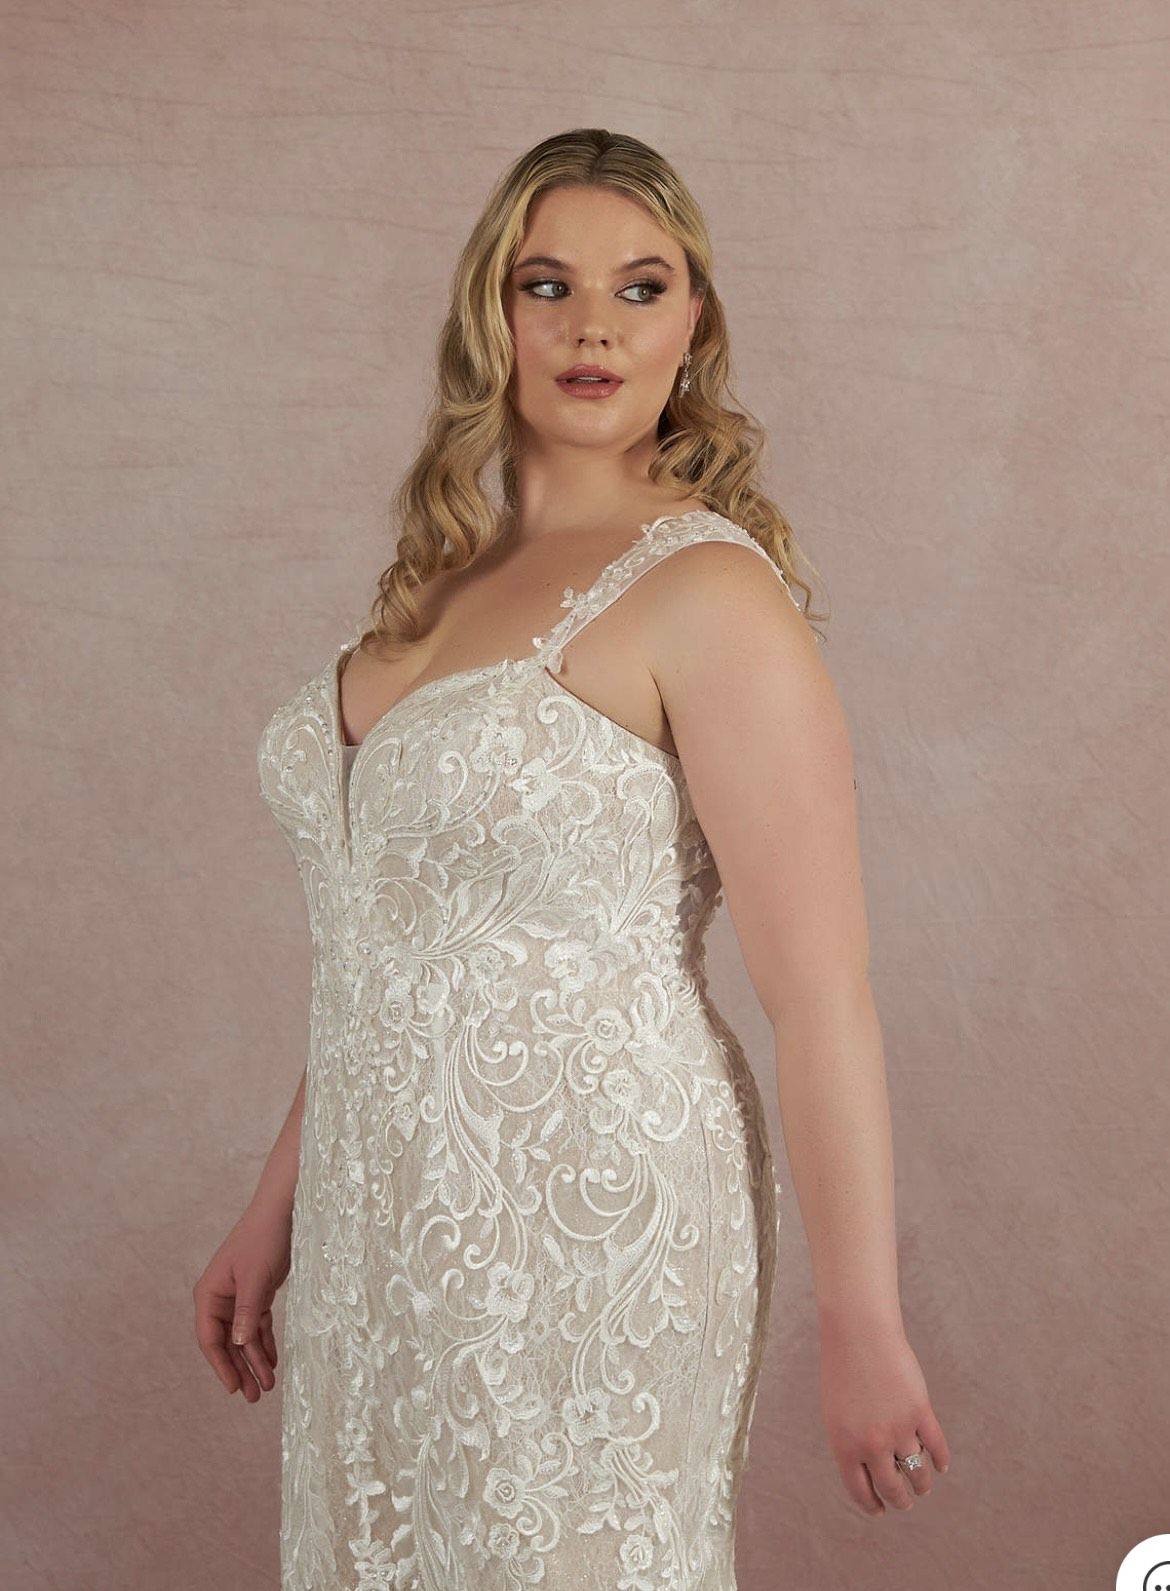 Style AZAZIE GARDNER Mermaid Sequins Lace Cathedral Train Dress Diamond White/Champagne Azazie Plus Size 18 Plunge Lace Nude Mermaid Dress on Queenly